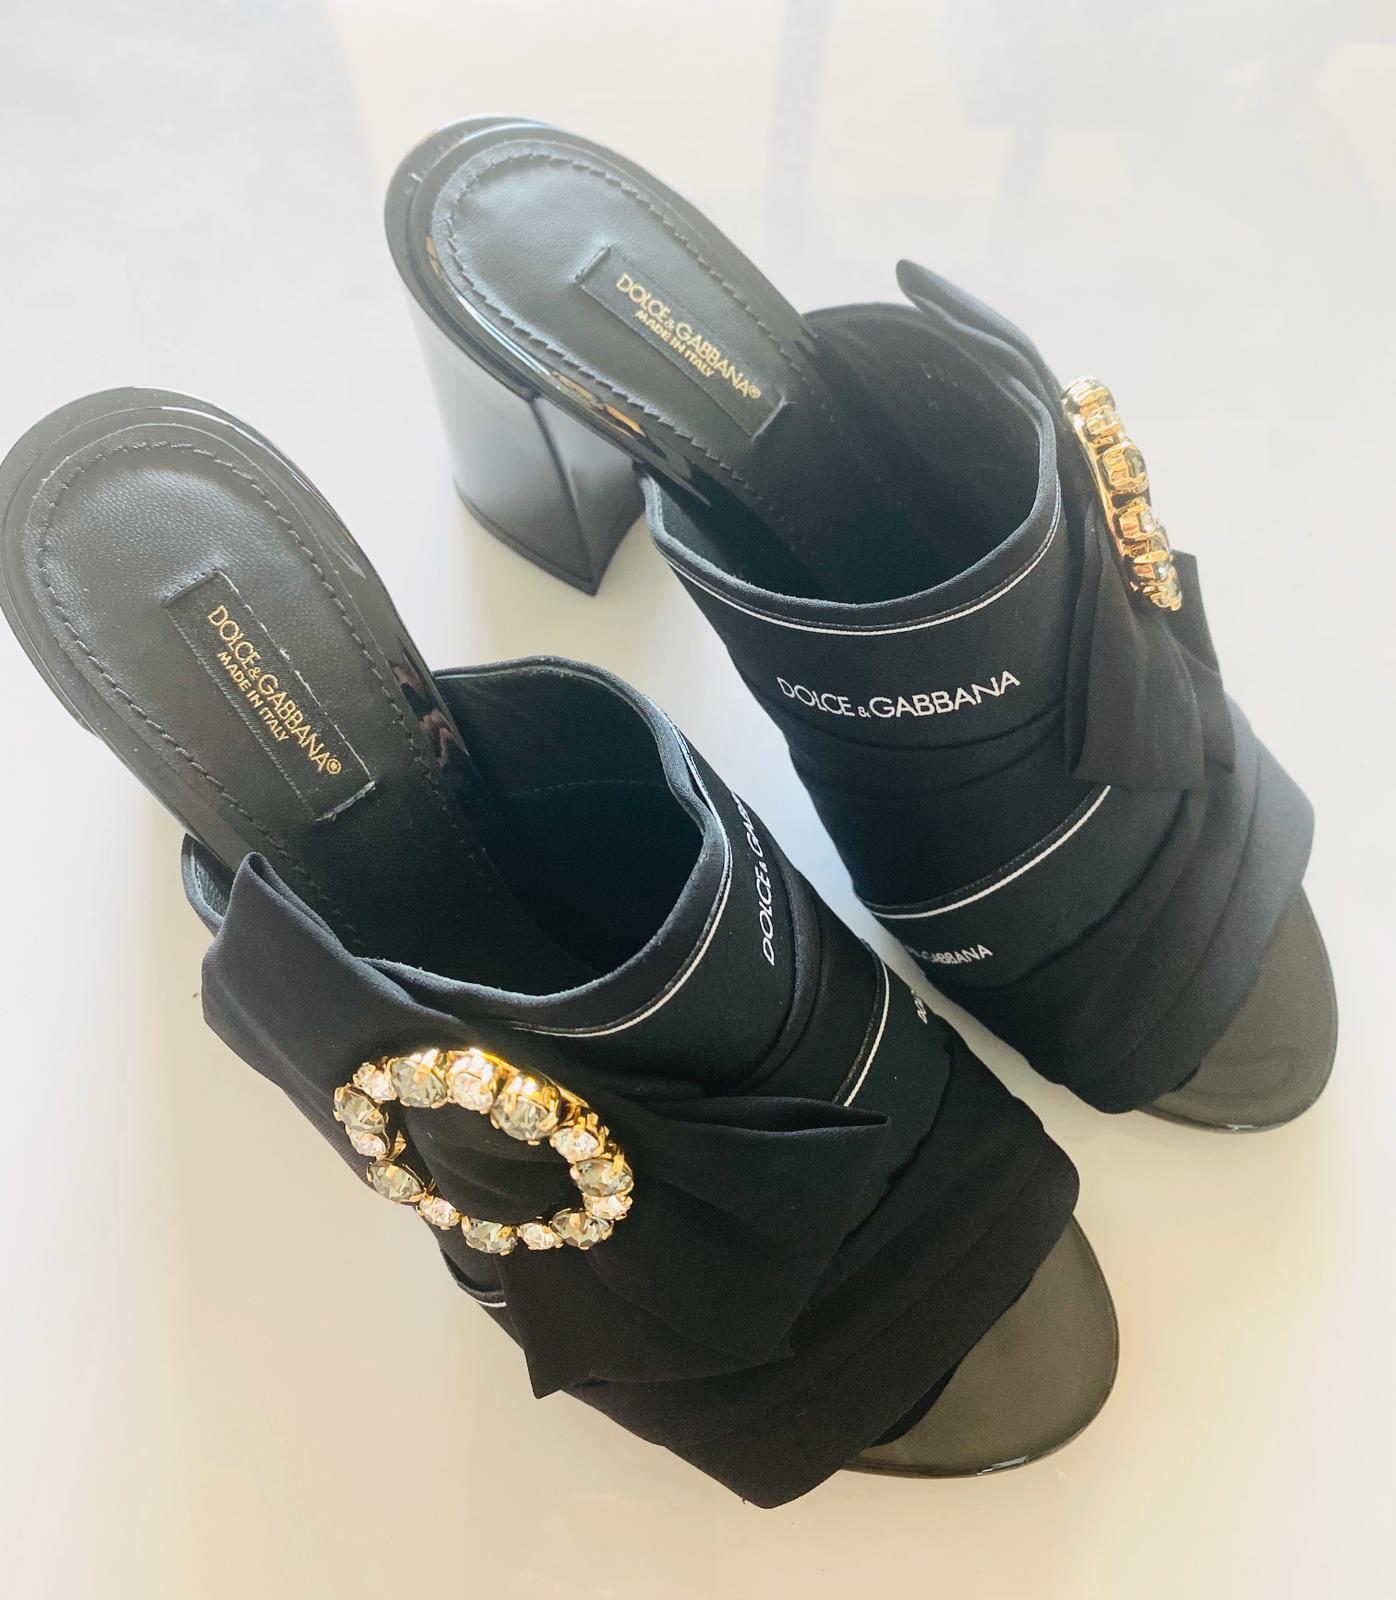 Dolce & Gabbana Black Crystals embellished Logo cloth leather  heels slip on shoes sandals

Size 38,5 UK5,5 

Brand new with the original box! 

Please check my other DG clothing, beachwear, shoes, bags and accessories!